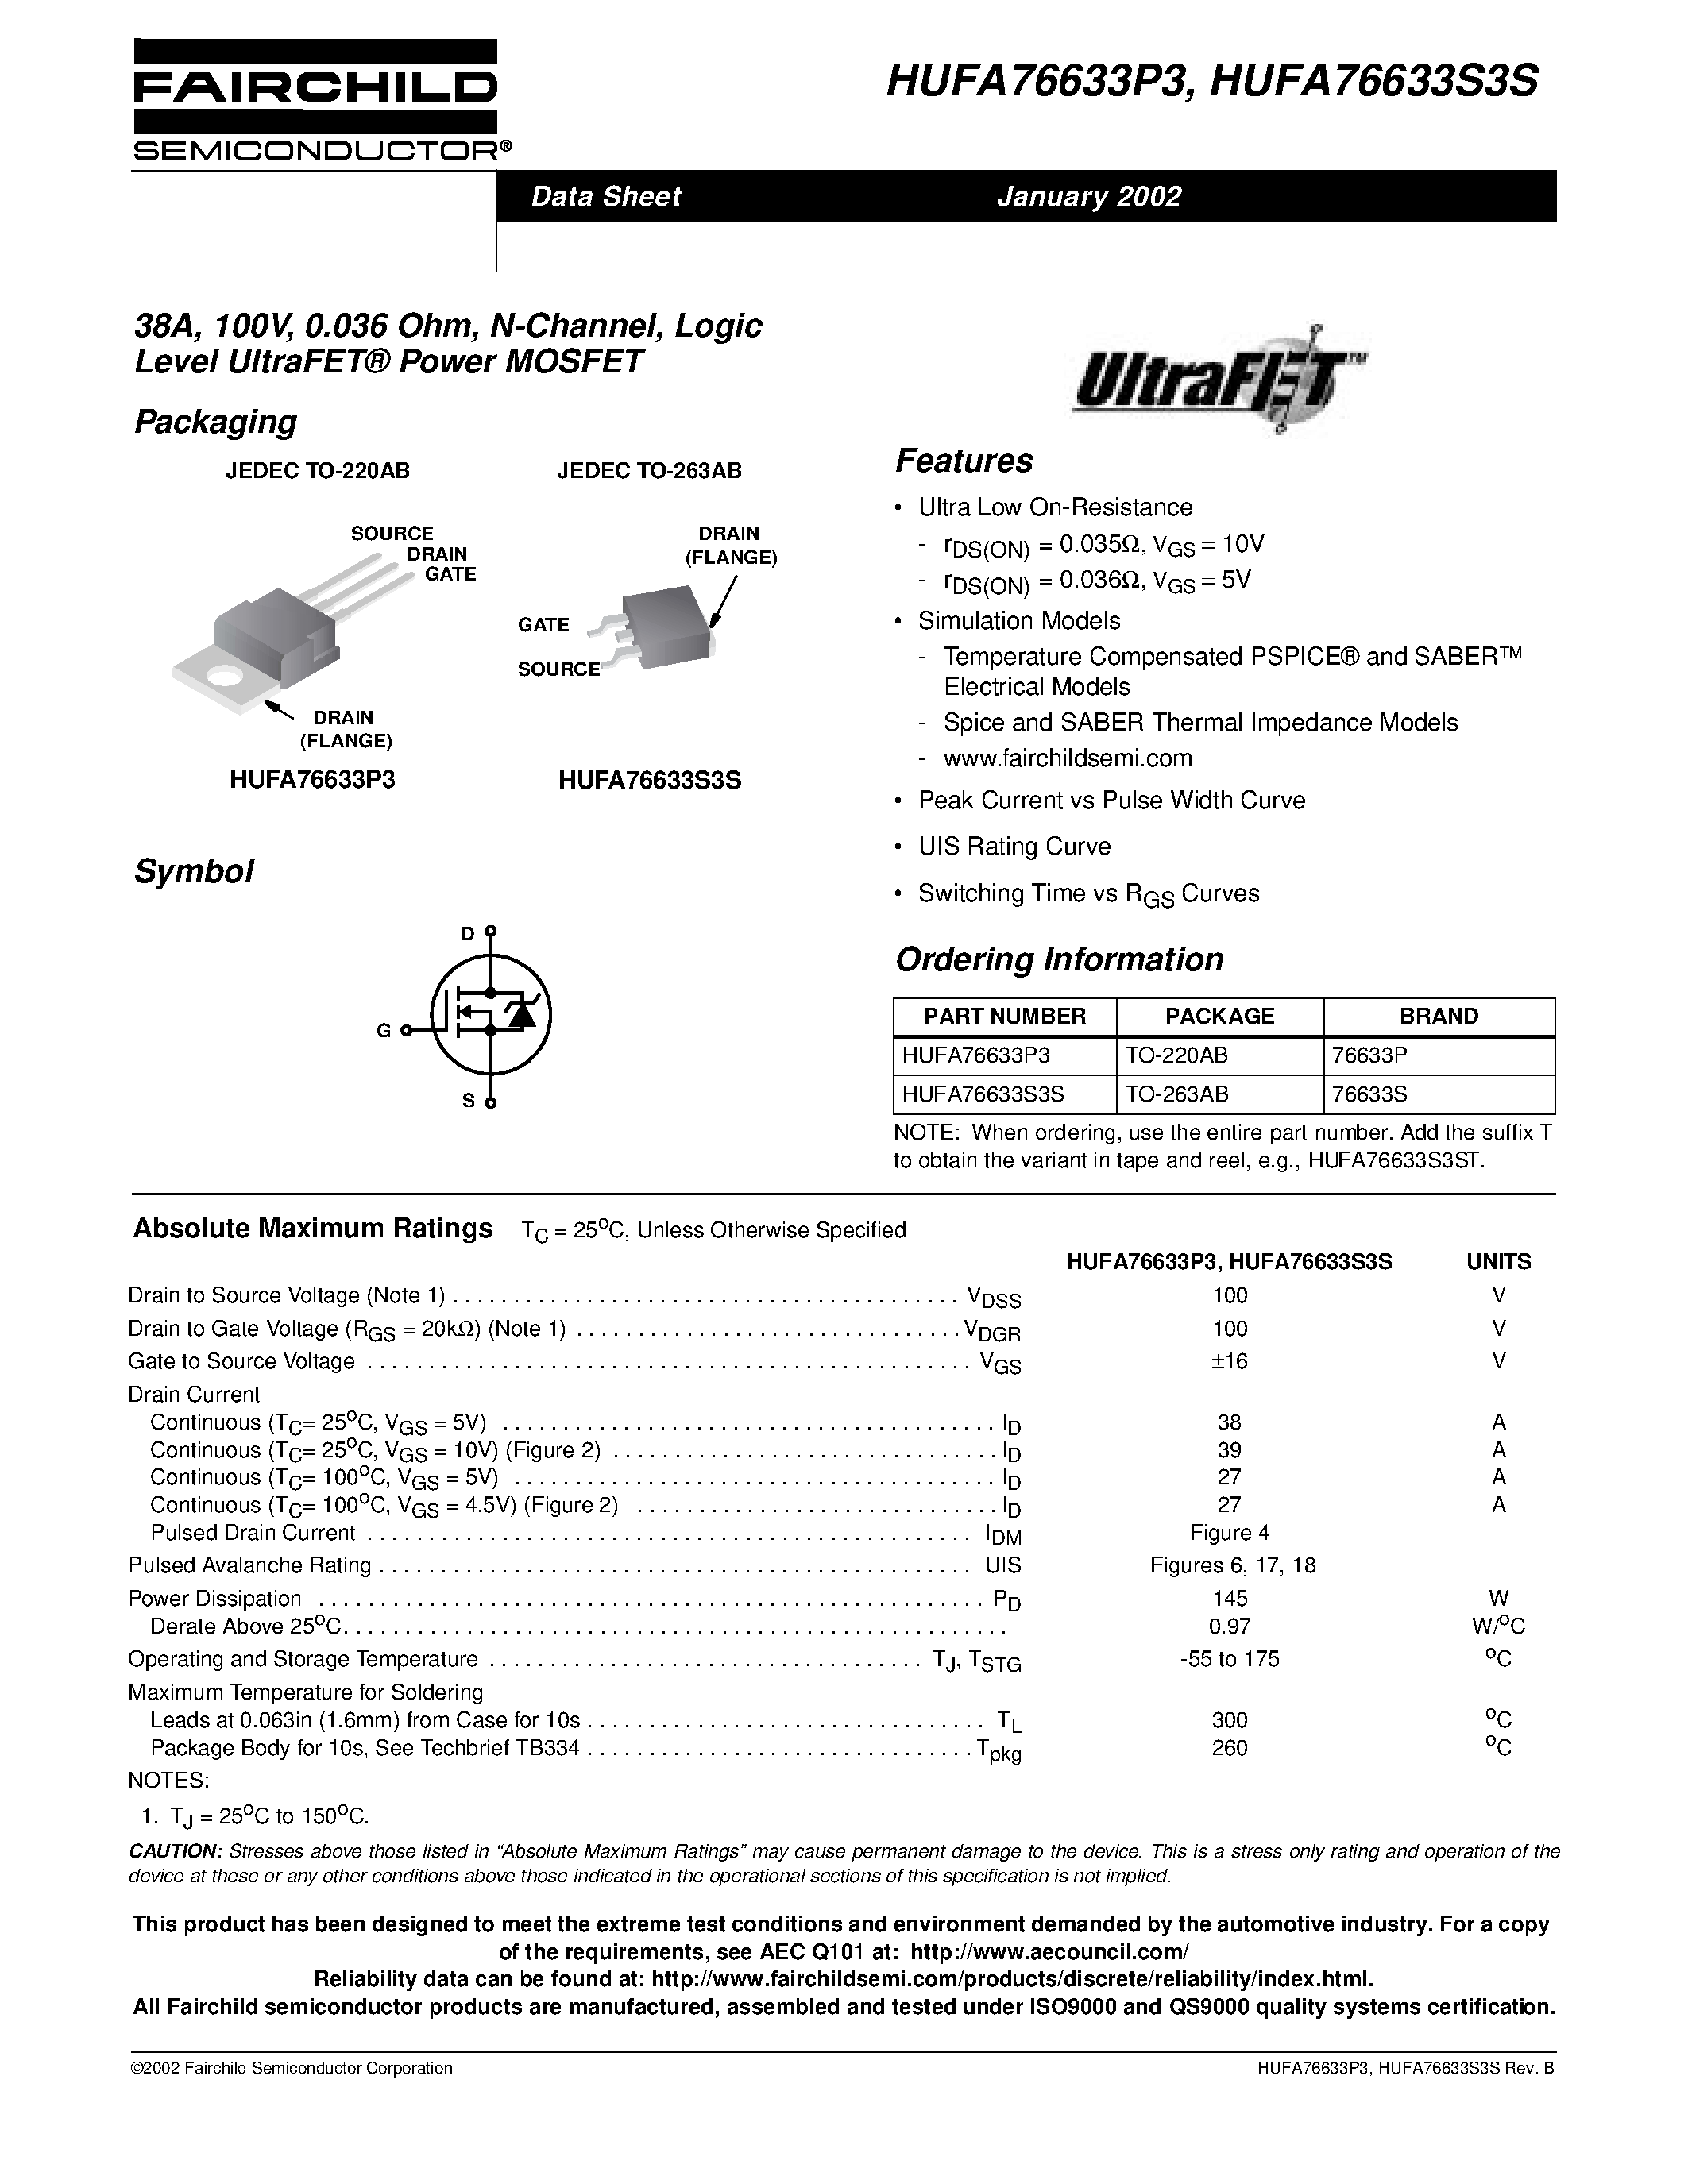 Datasheet HUFA76633S3S - 38A/ 100V/ 0.036 Ohm/ N-Channel/ Logic Level UltraFET Power MOSFET page 1